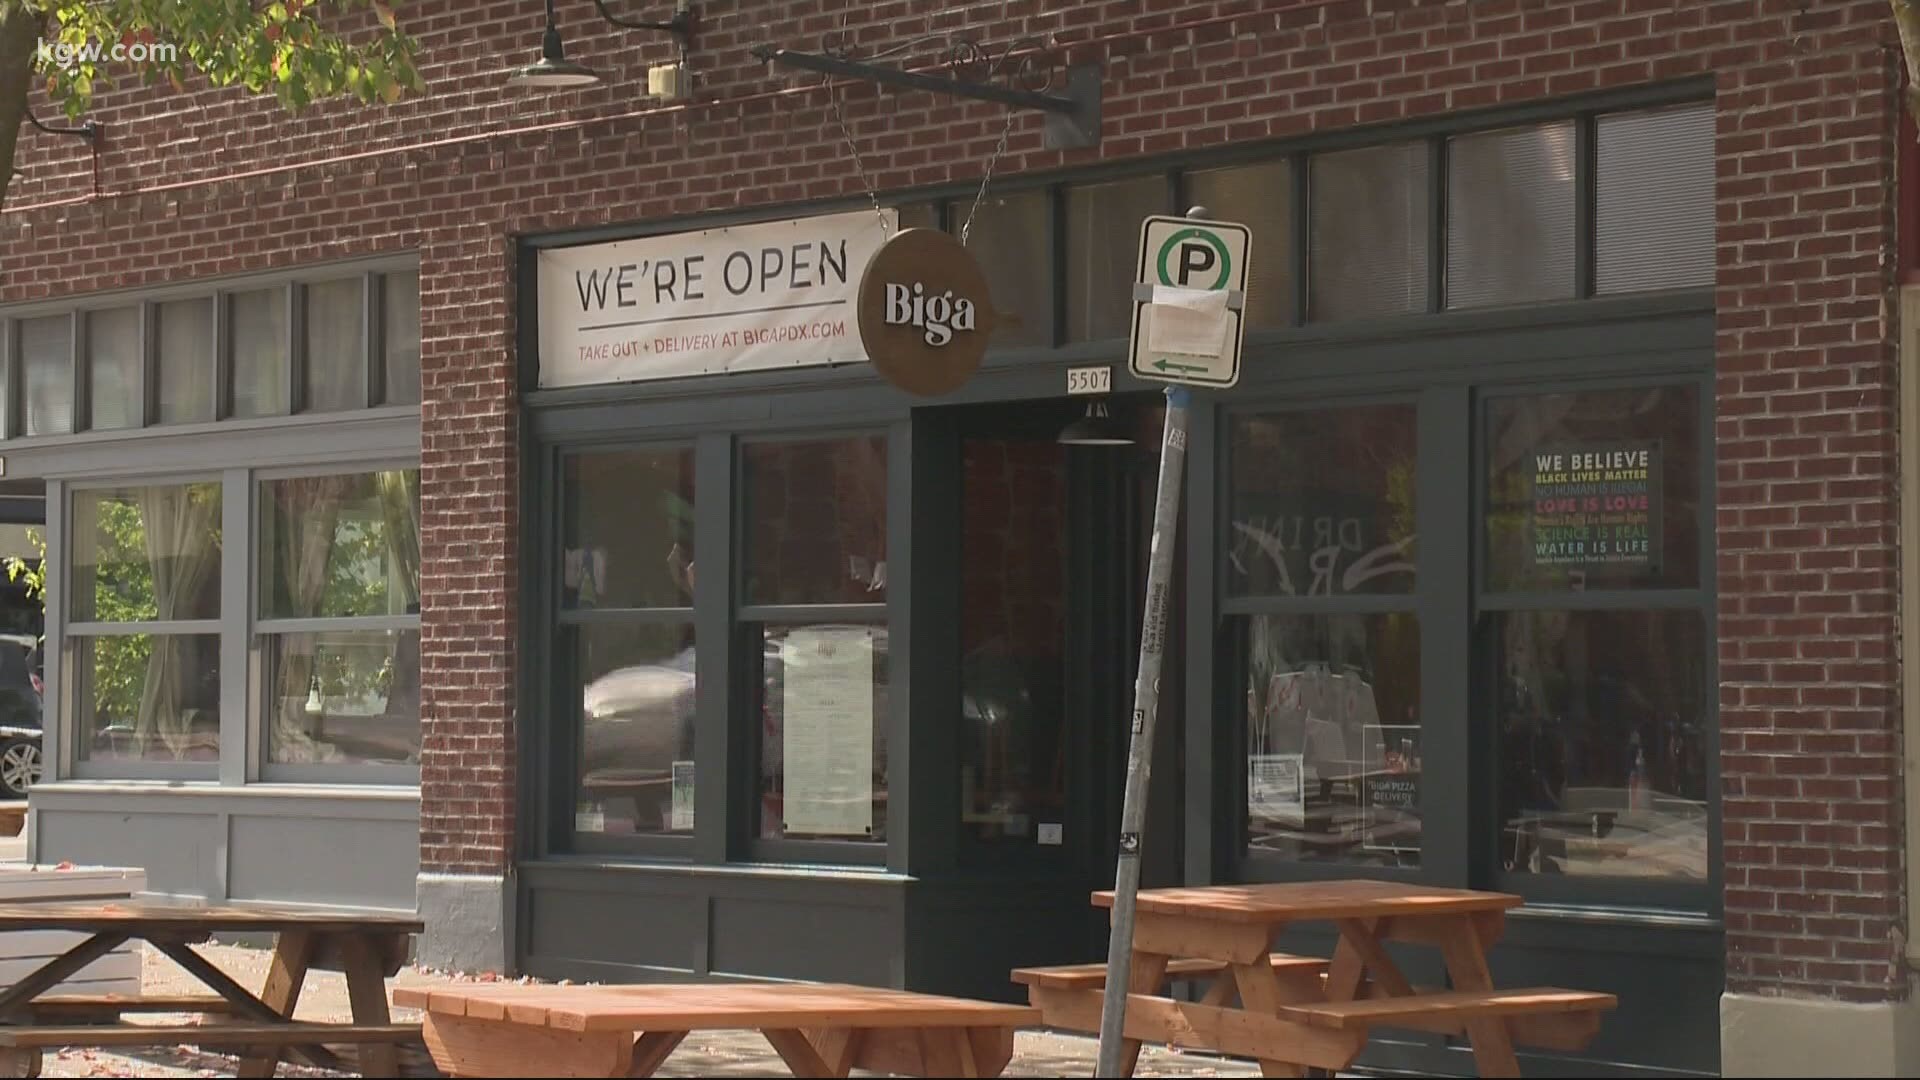 Without the ability to sell alcohol, bar owners aren’t sure how they’ll get through this second shutdown. Morgan Romero reports.